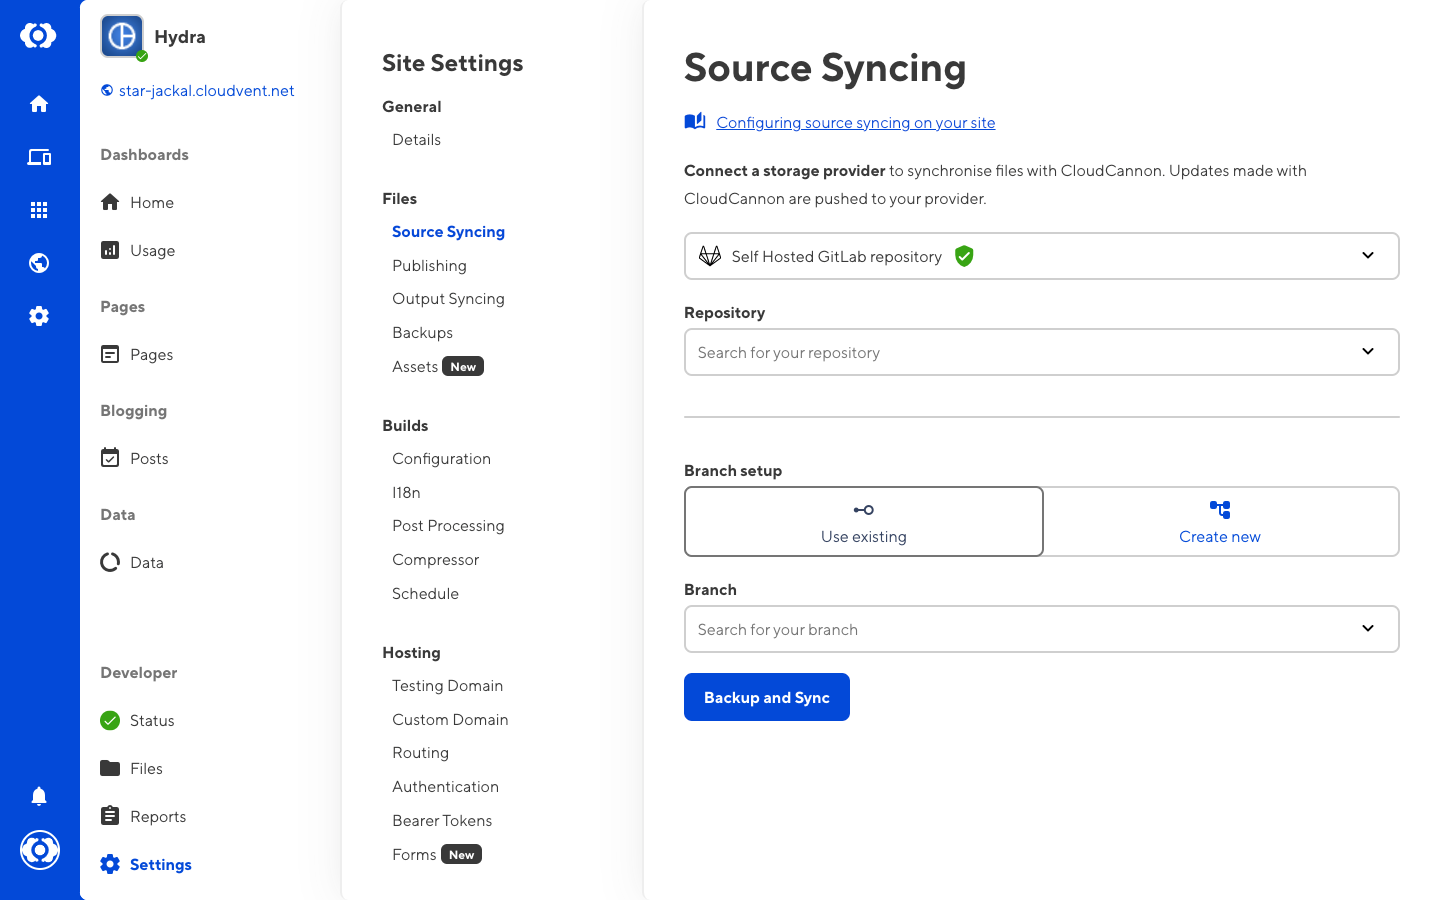 Selecting self hosted GitLab repository to sync